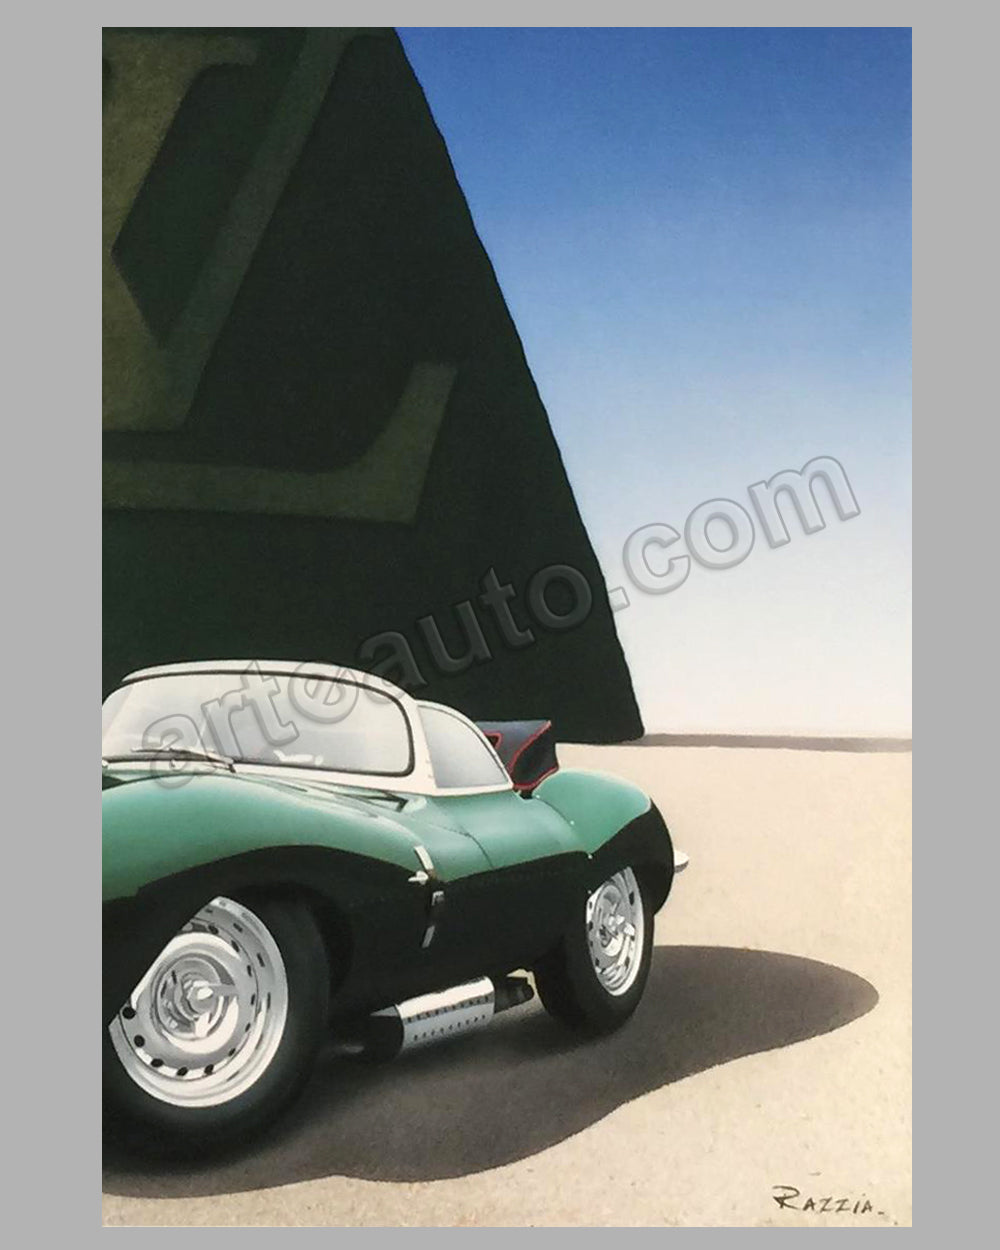 Louis Vuitton Classic at the Hurlingham Club 1998 large poster by Razzia